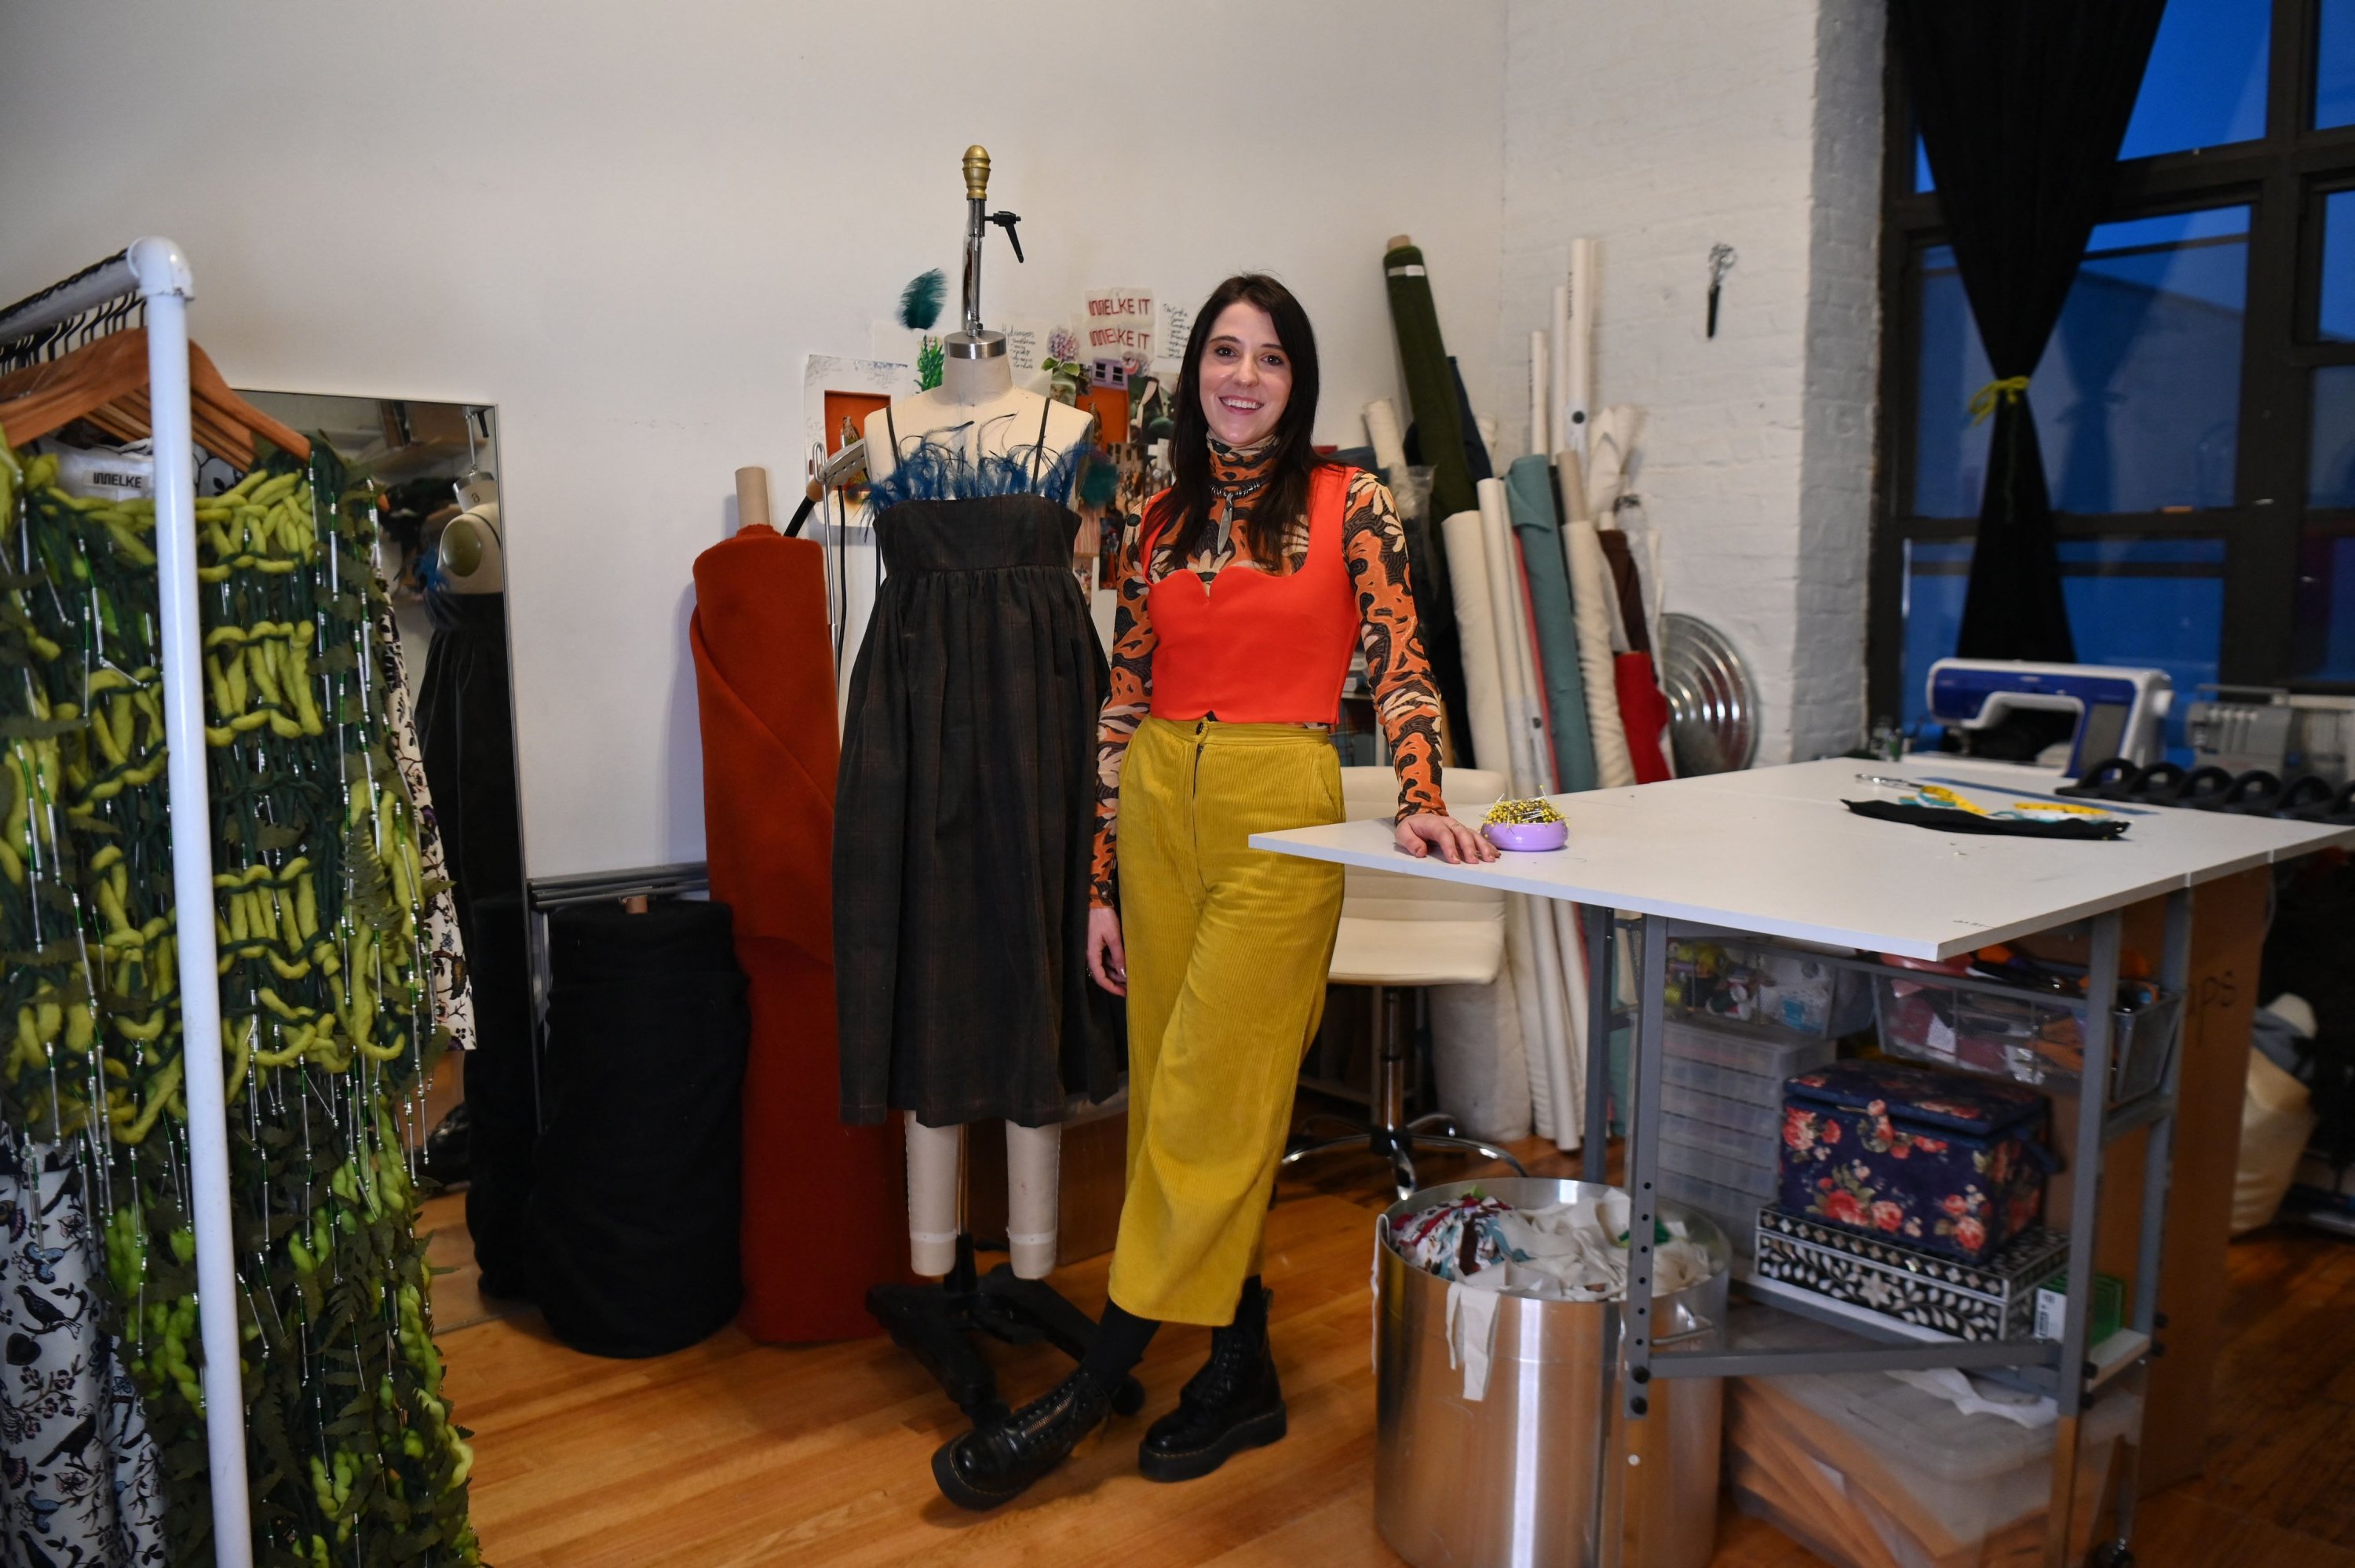 Fashion designer Emma Gage of Melke stands for a photo in her studios, Feb. 4, 2022, New York City, U.S. (AFP Photo)